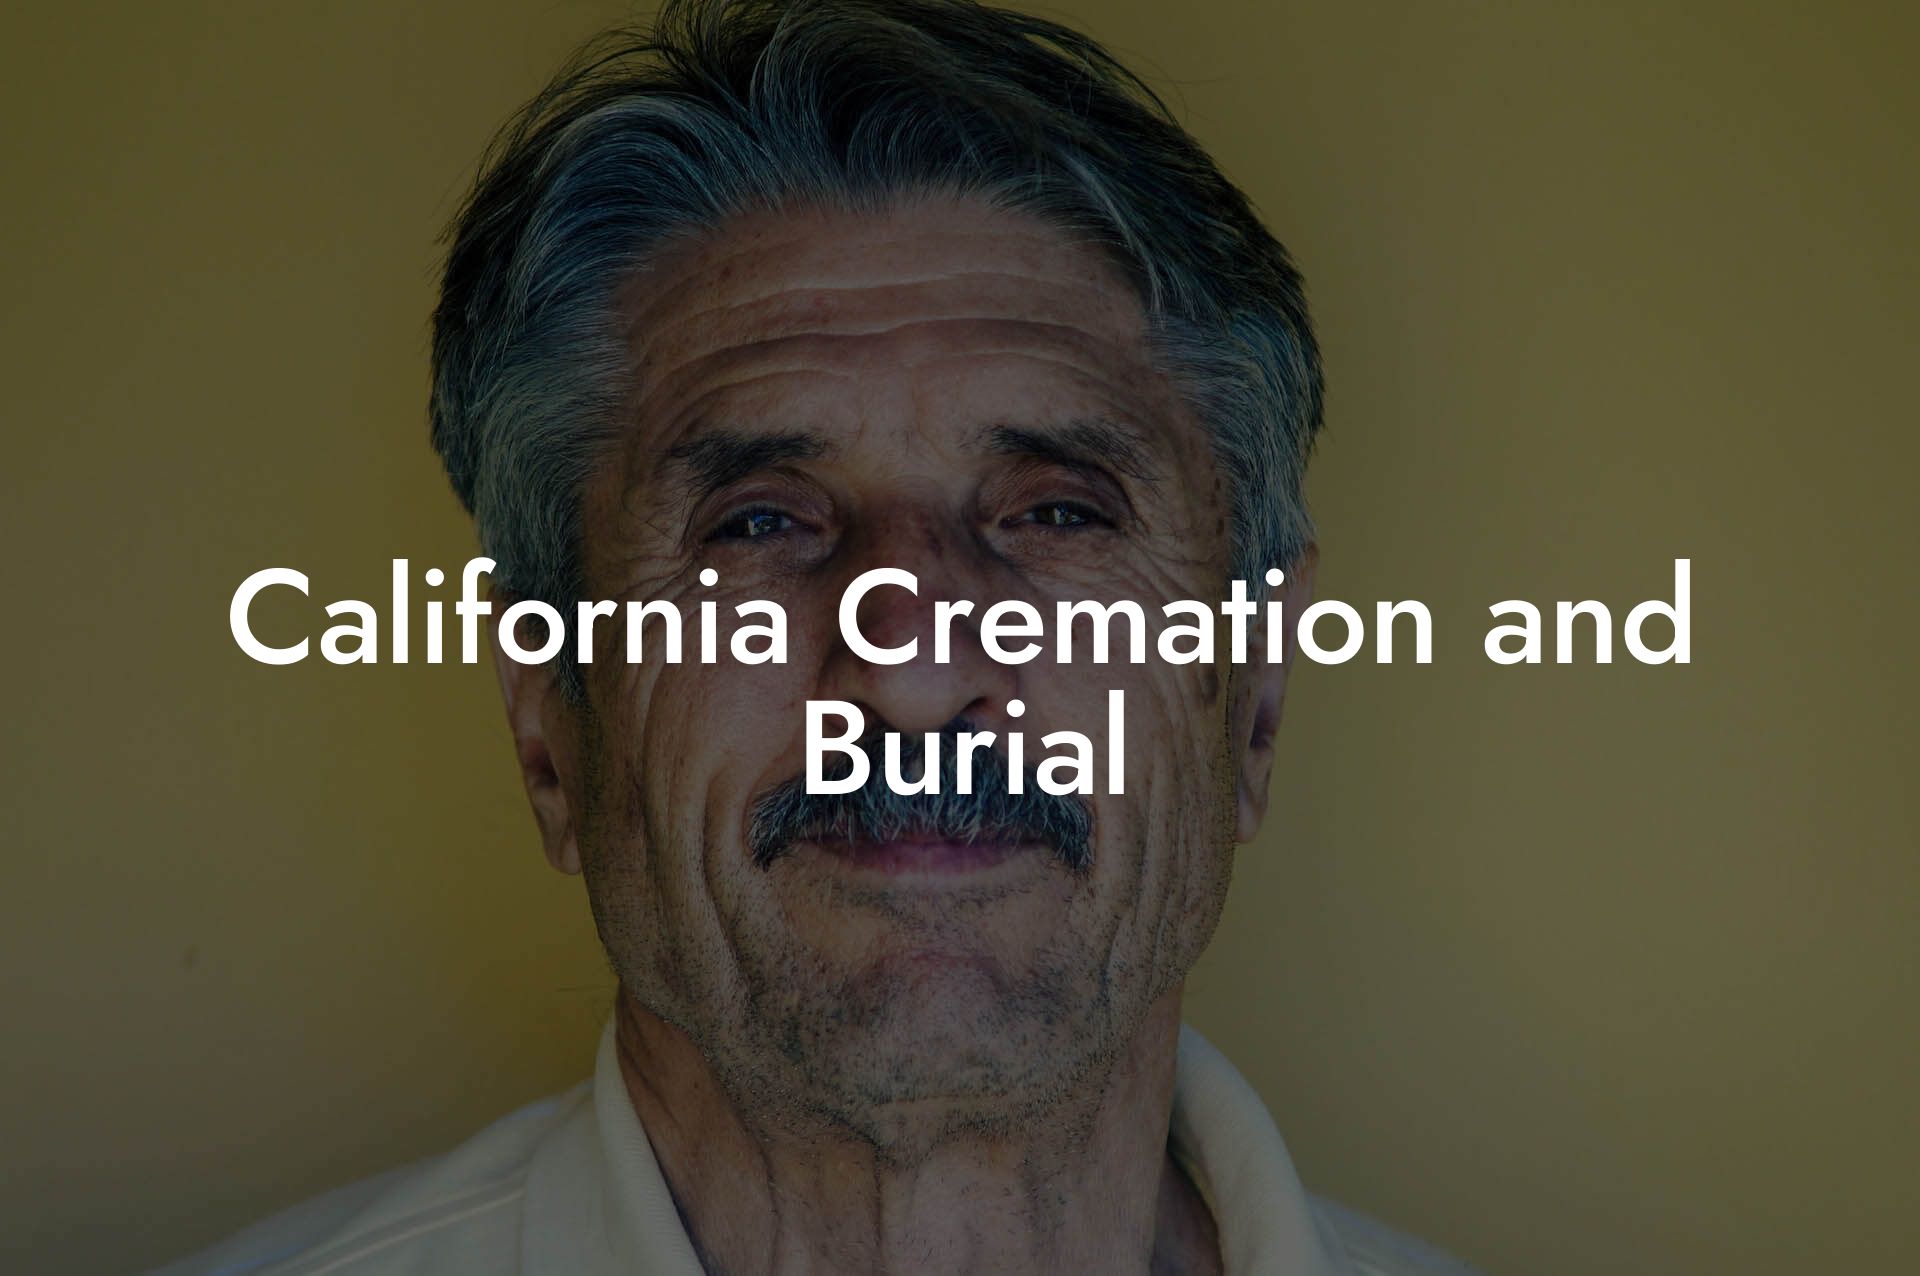 California Cremation and Burial